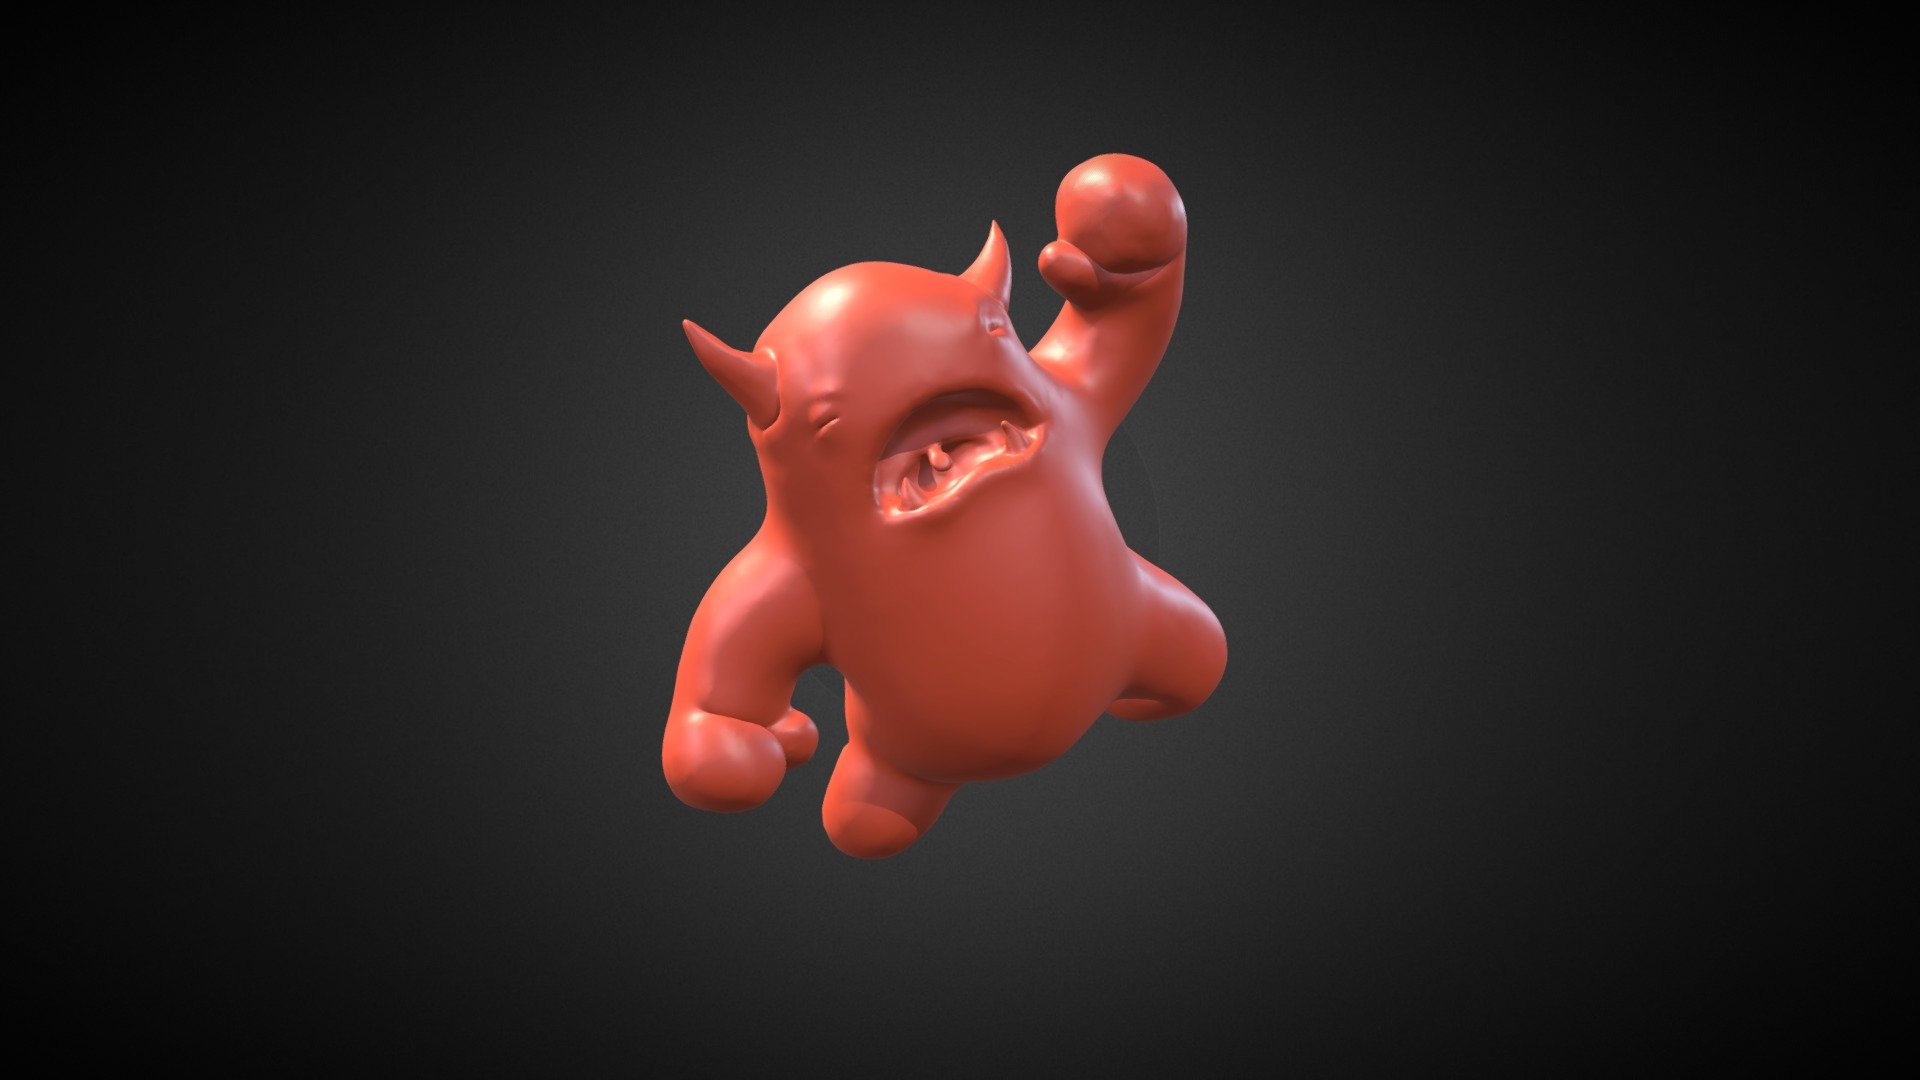 Exercise: Sculpting Melvin